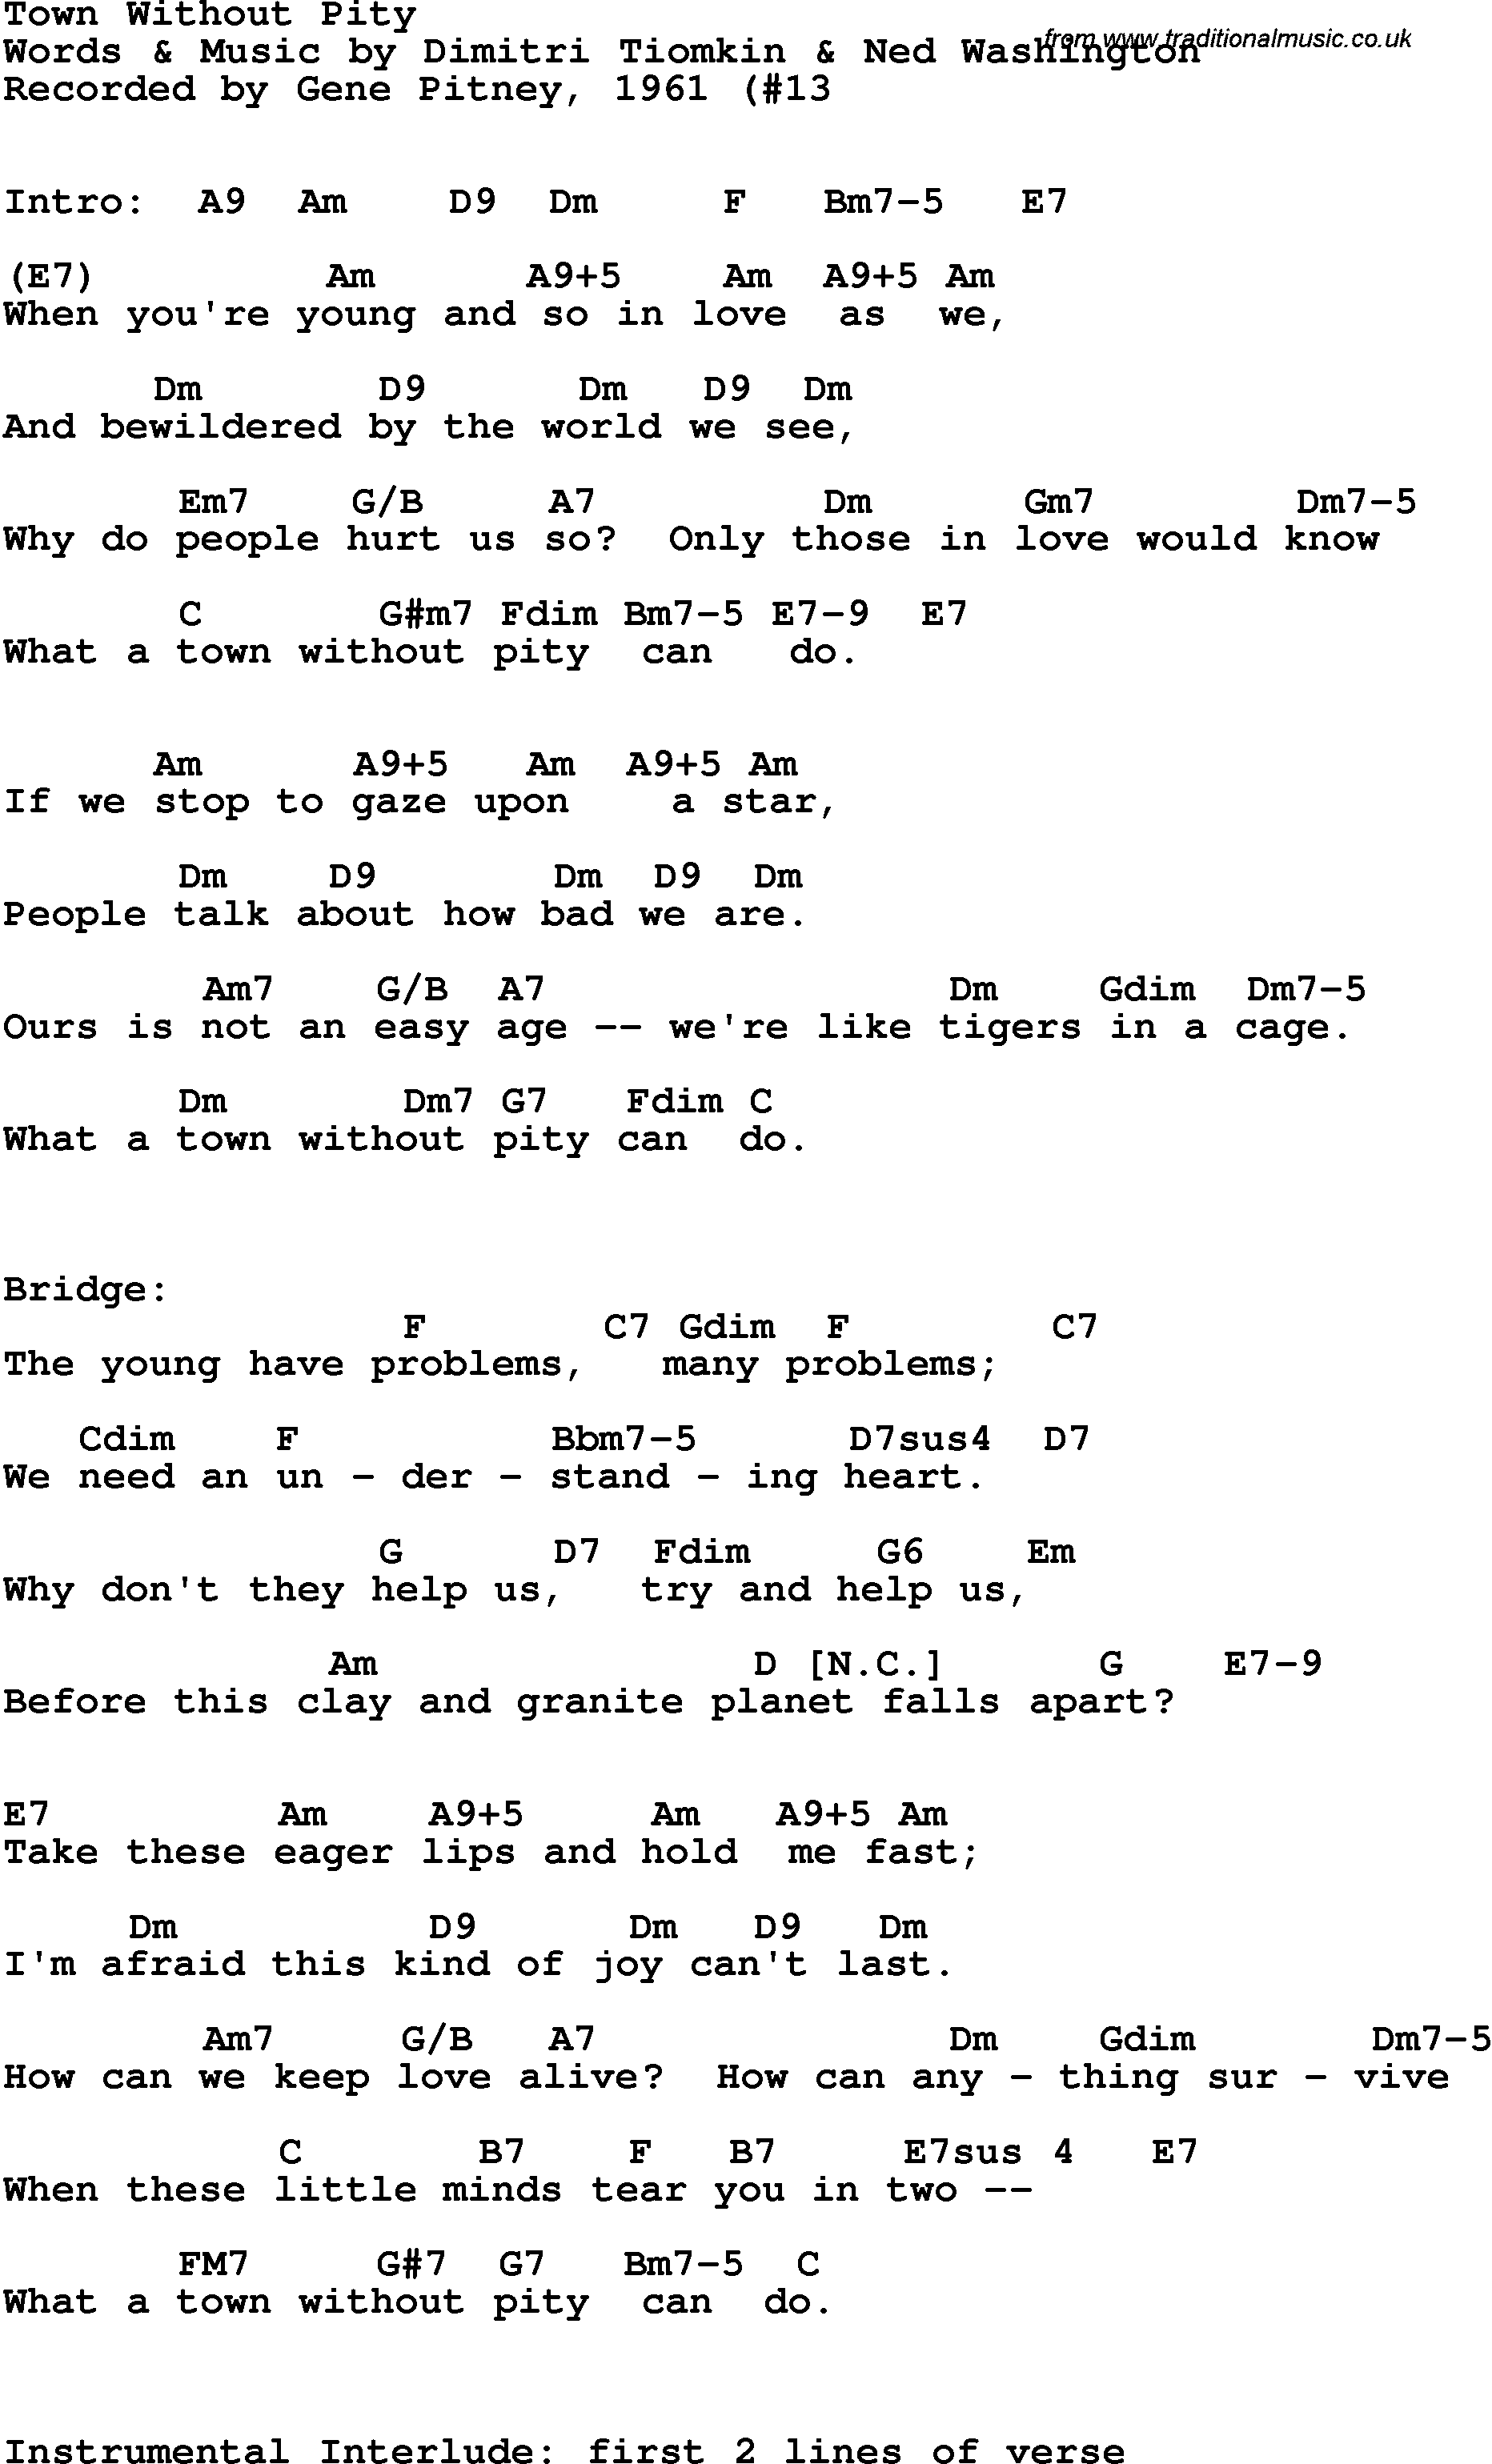 Song Lyrics with guitar chords for Town Without Pity - Gene Pitney, 1961